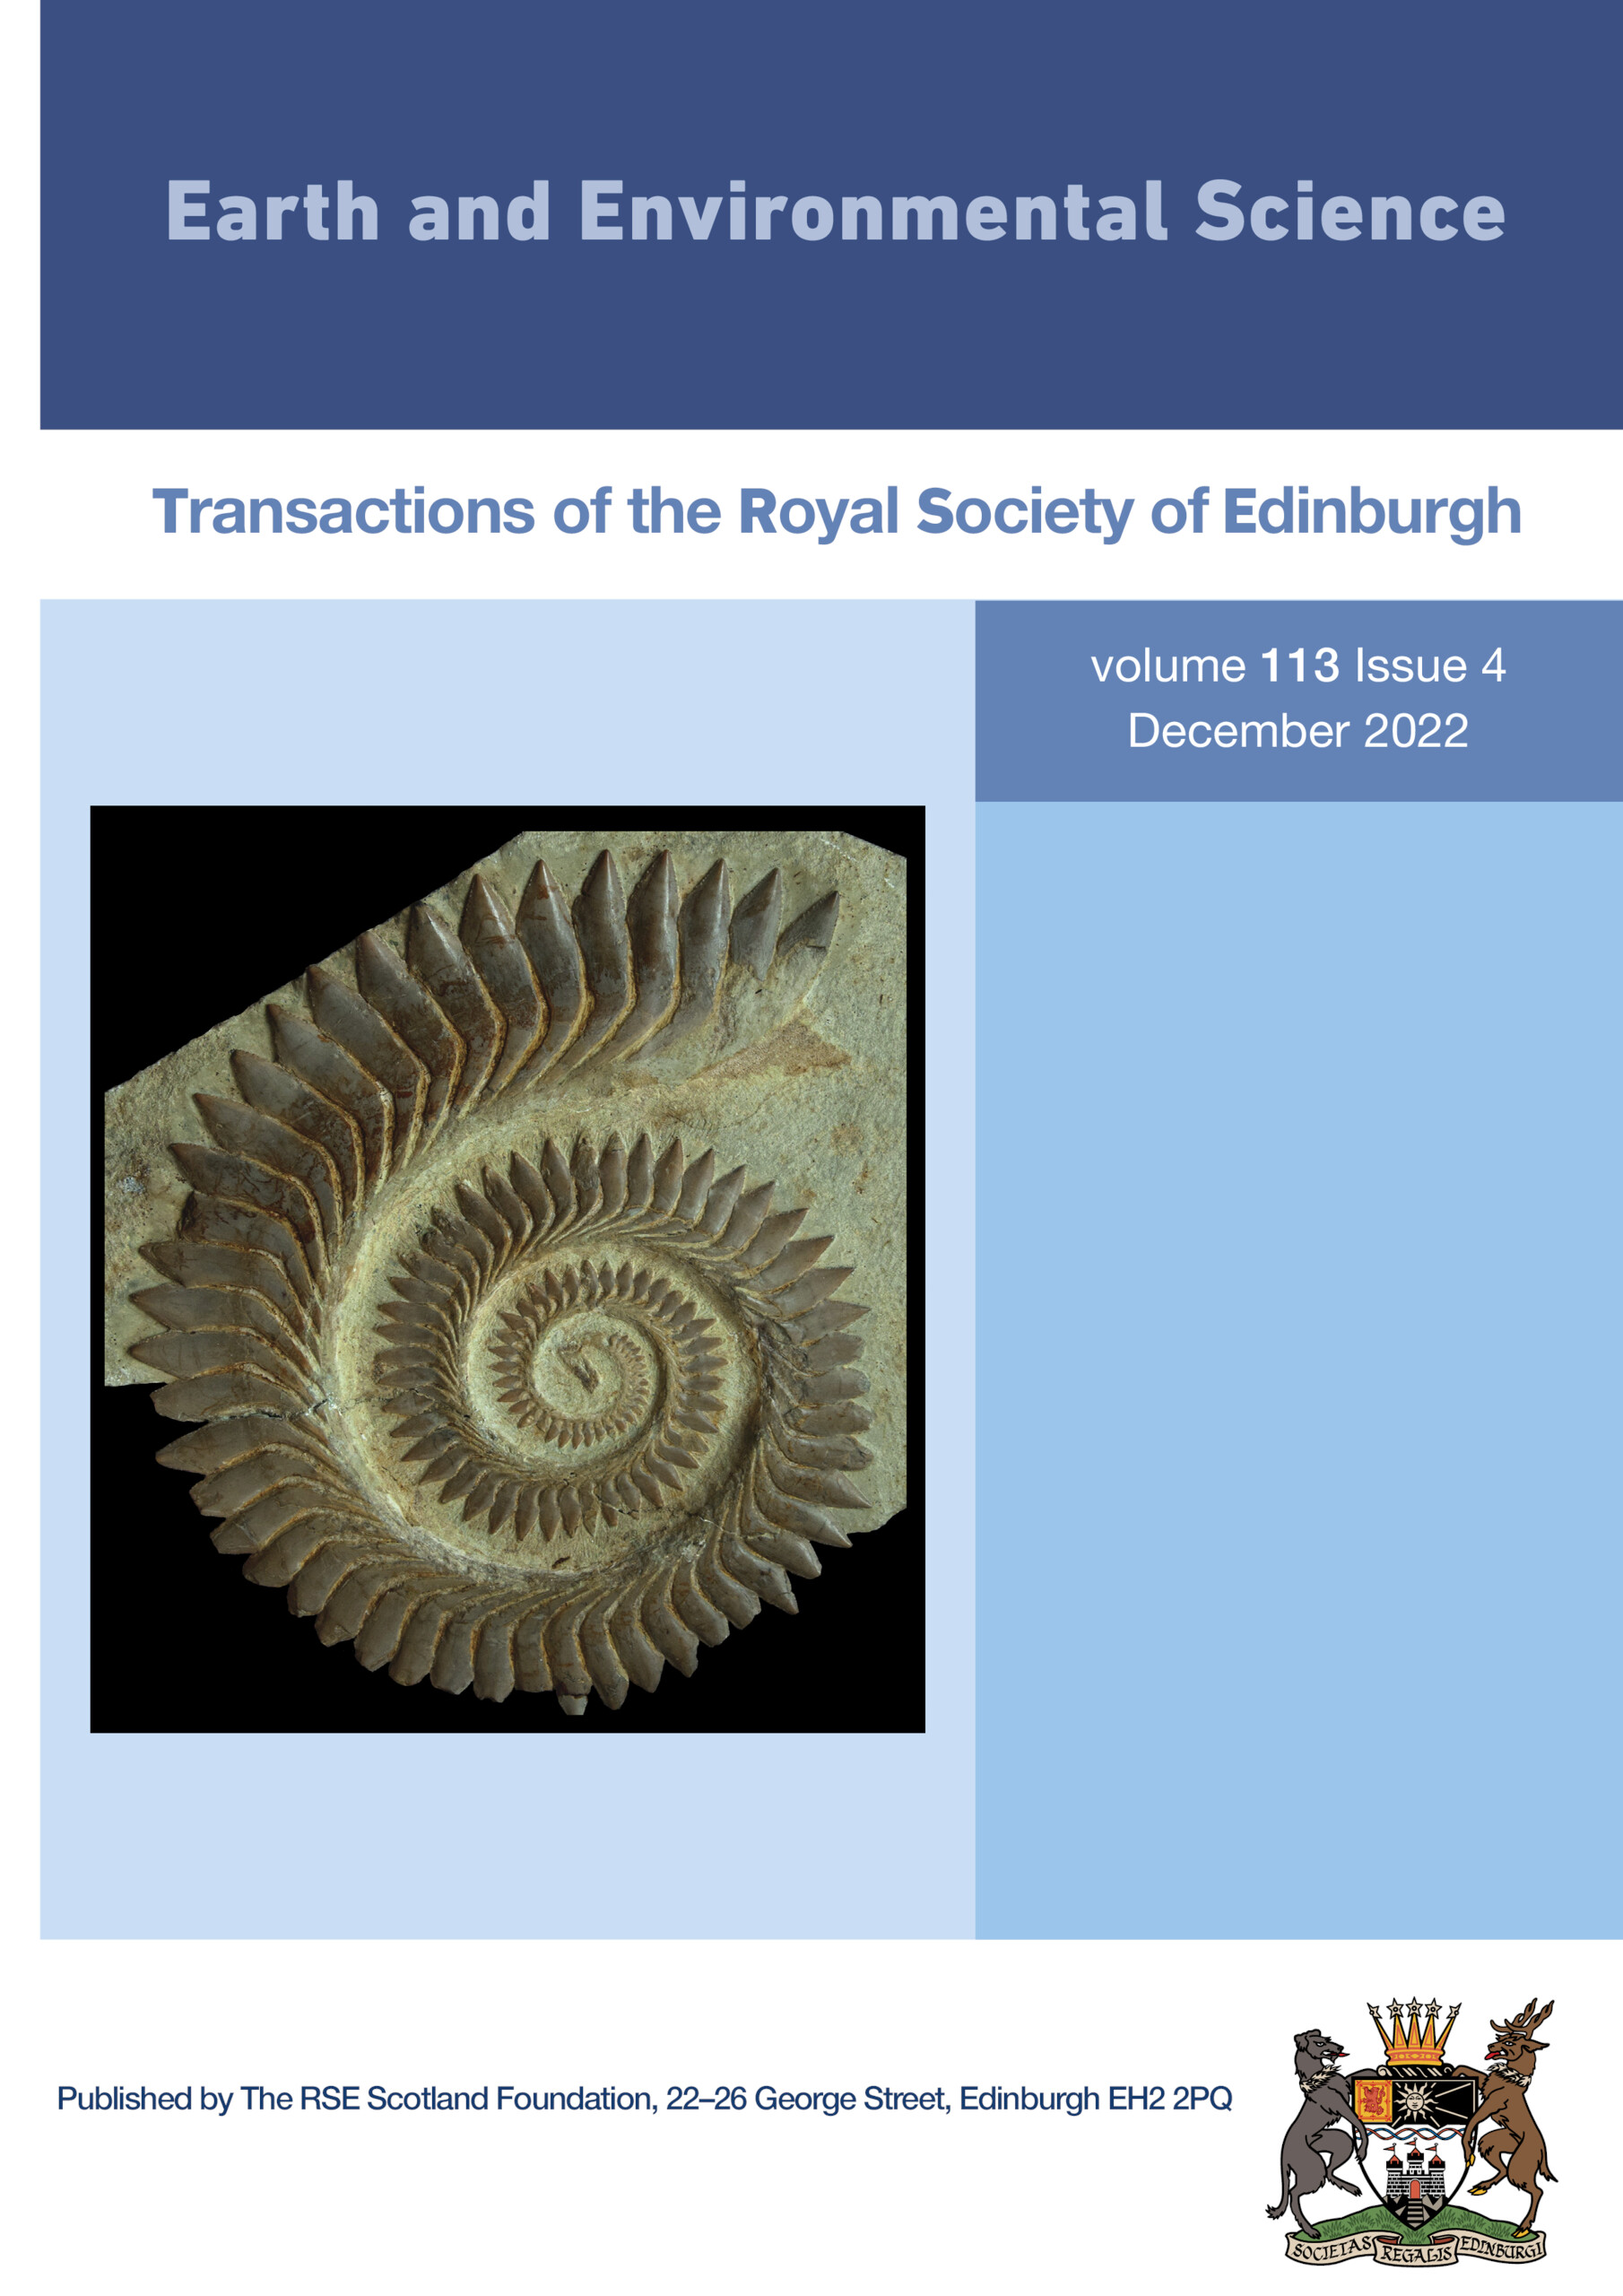 Earth and environmental science transactions of the Royal Society of Edinburgh.